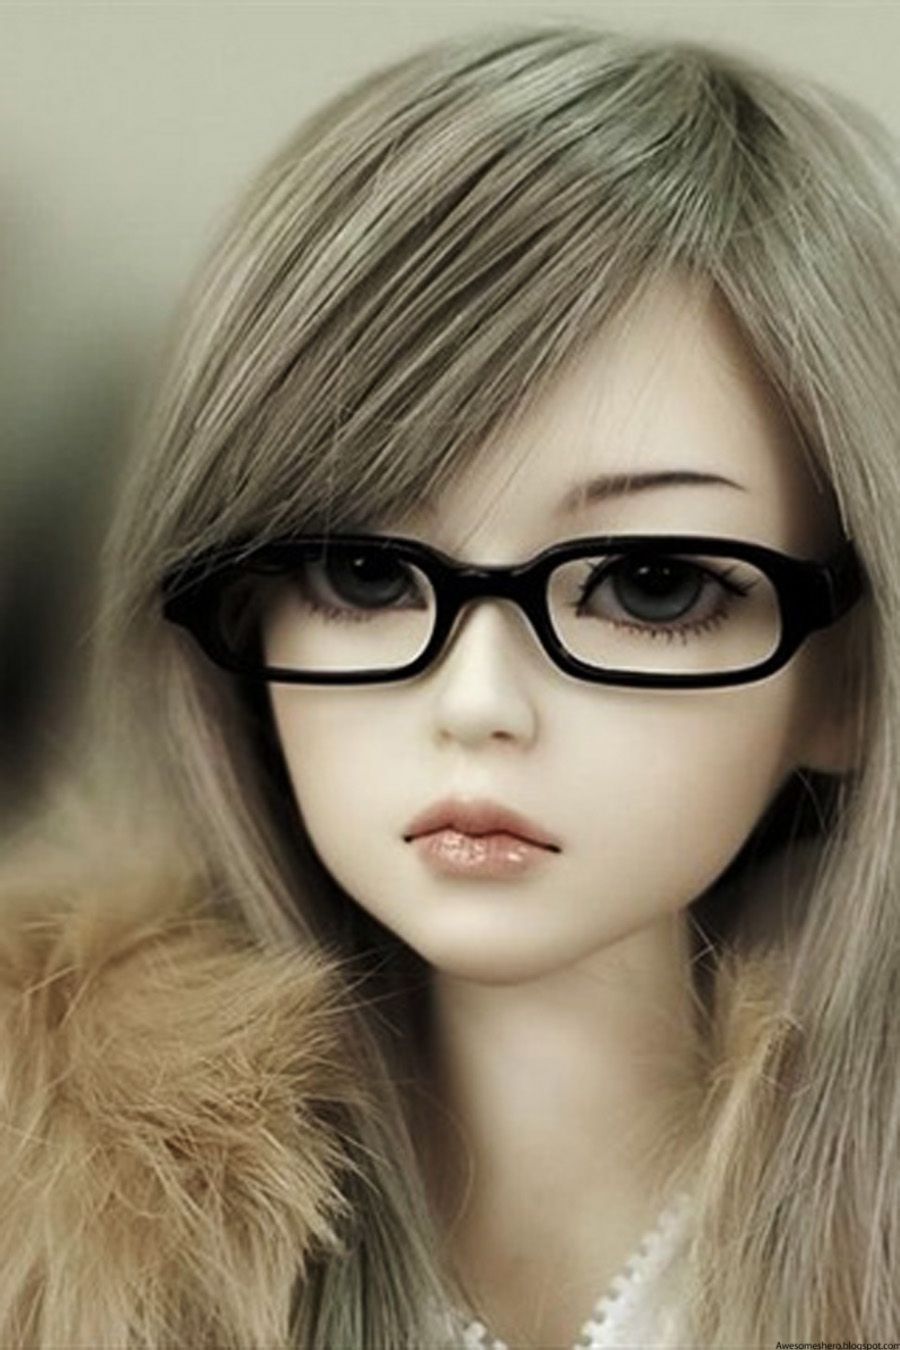 Doll Wallpaper APK 13 for Android  Download Doll Wallpaper APK Latest  Version from APKFabcom